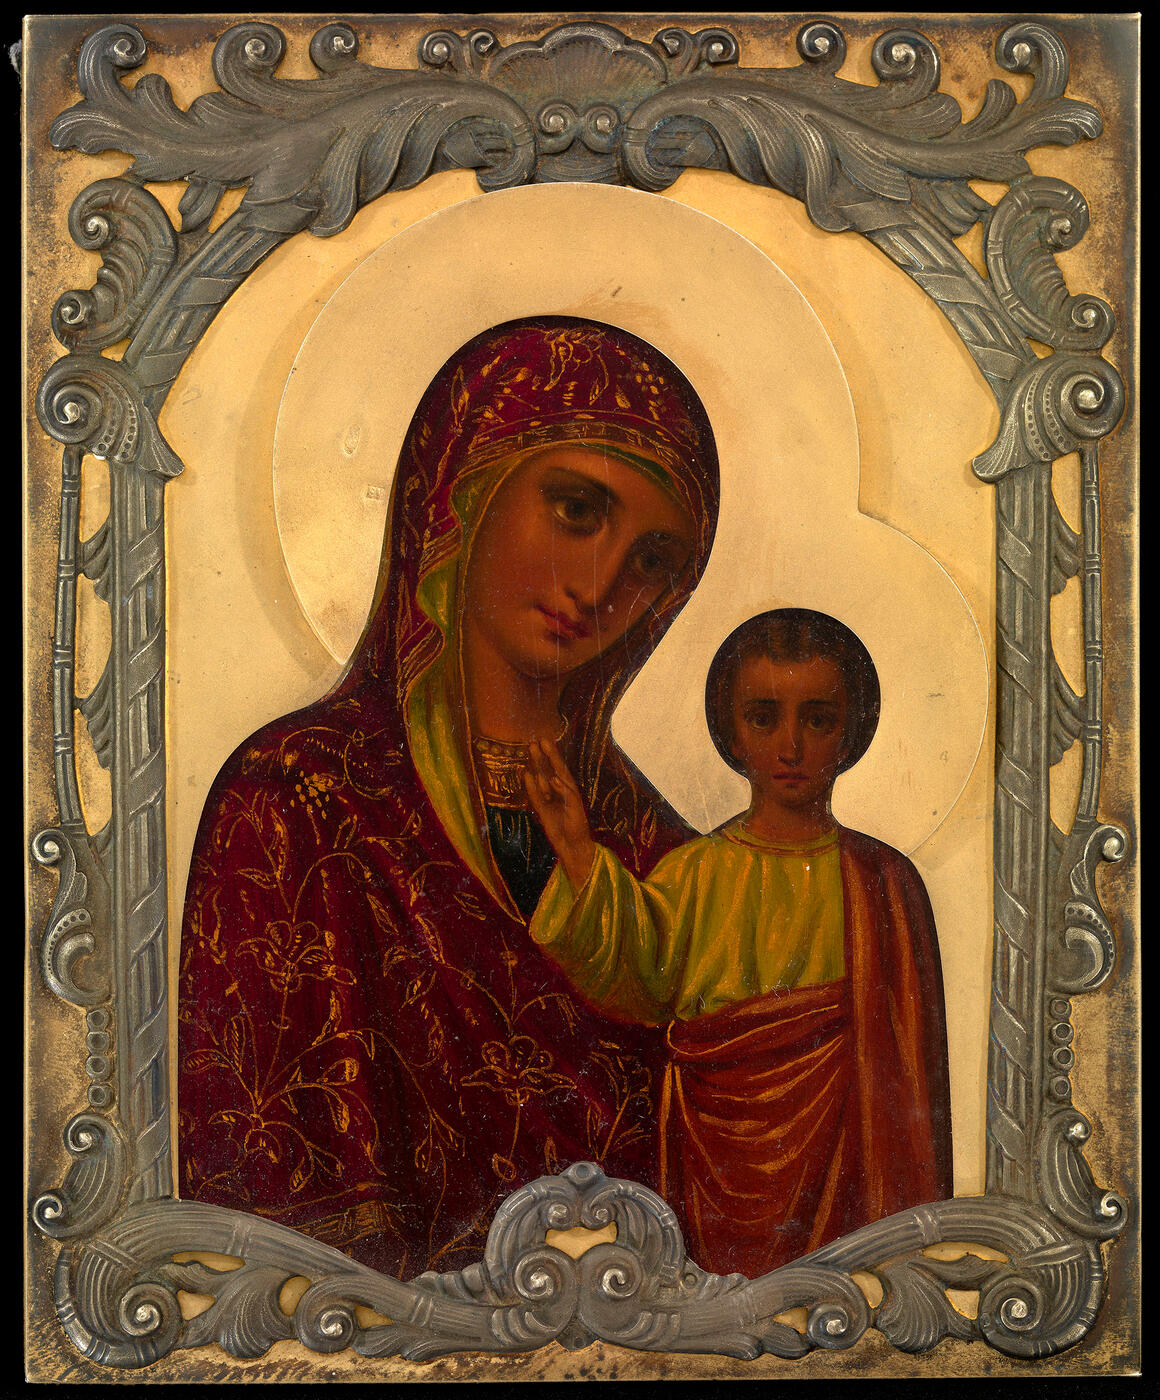 EARLY 20TH CENTURY, OIL ON PANEL, OKLADS STAMPED WITH MAKER'S MARKS EU IN CYRILLIC, MOSCOW, 84 STANDARD.